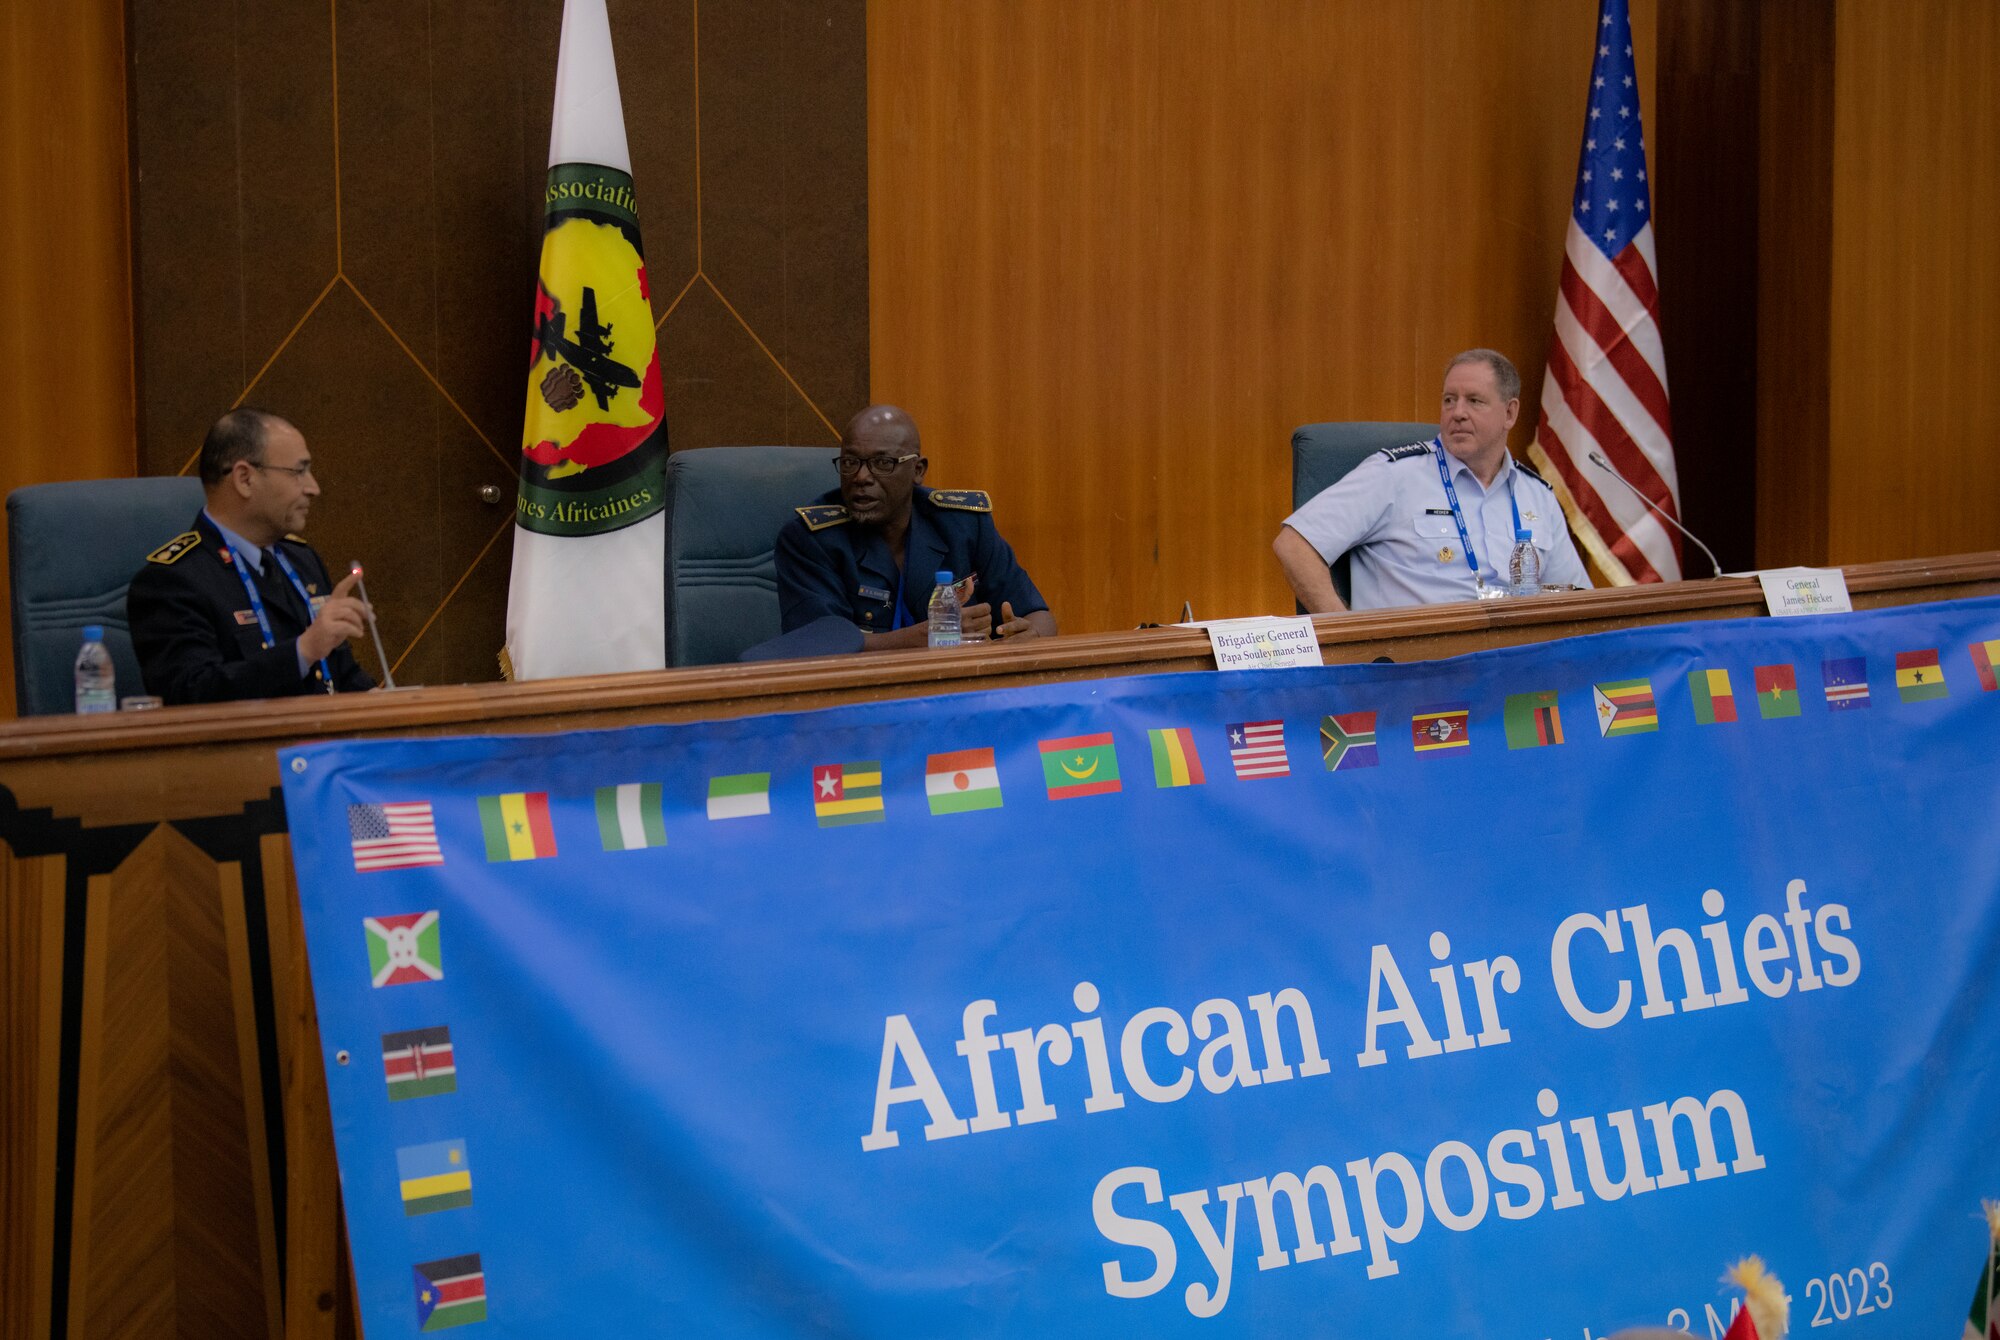 AACS 2023 comes to a close, expands influence across Africa